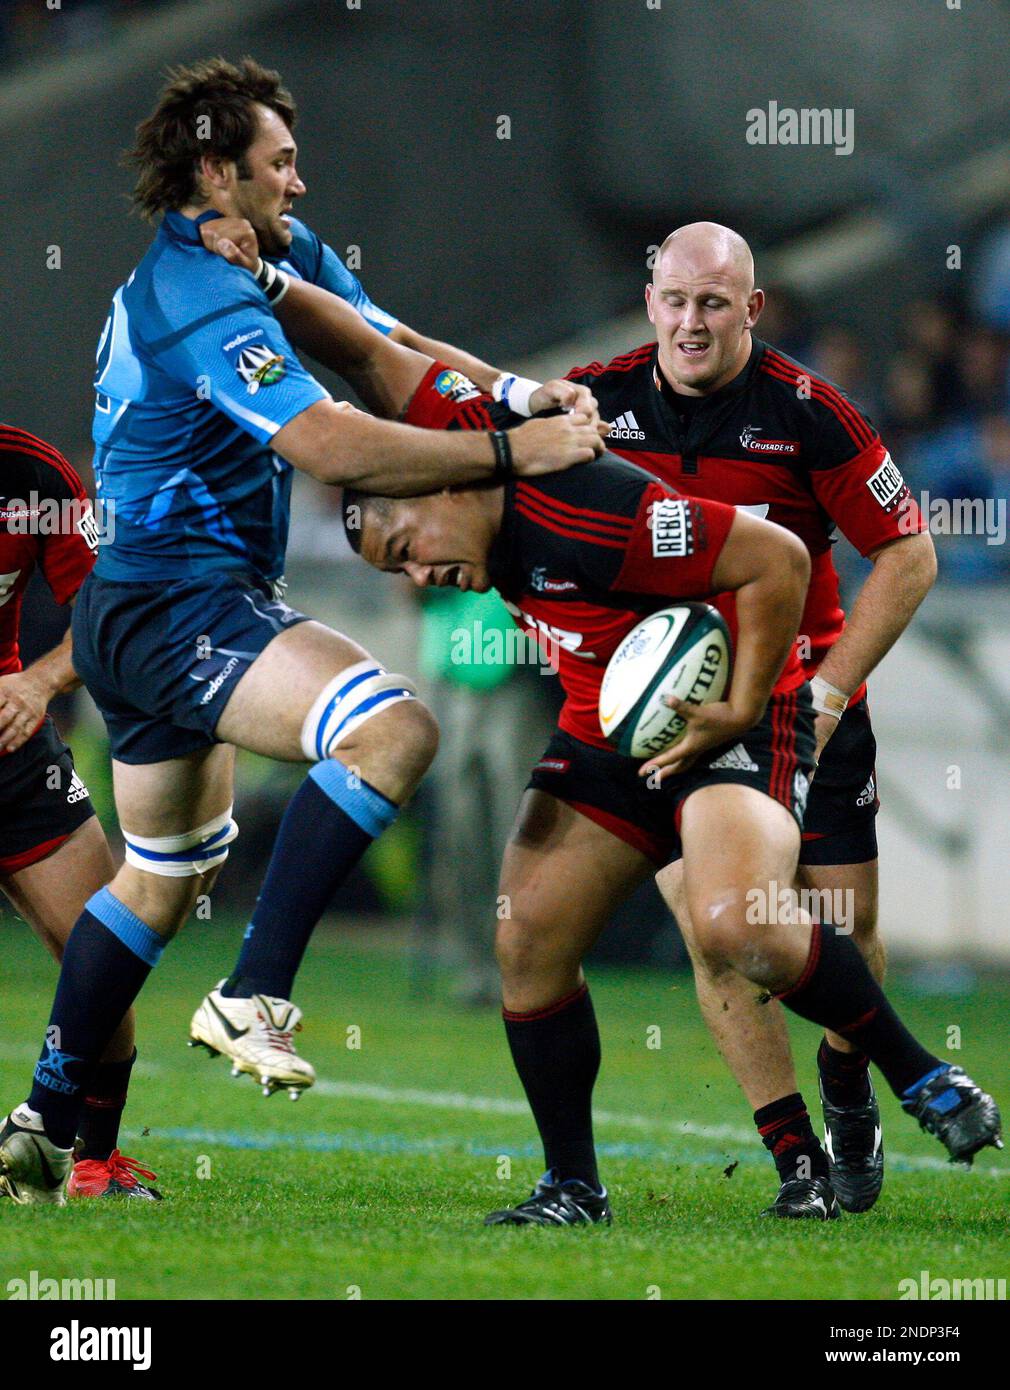 New Zealand Crusaders Ti'i Paulo, right, avoid a tackle from South Africa's  Bulls Pedrie Wannenburg, left, during the semi-finals of the Super 14 rugby  match at the Orlando stadium in Soweto, South